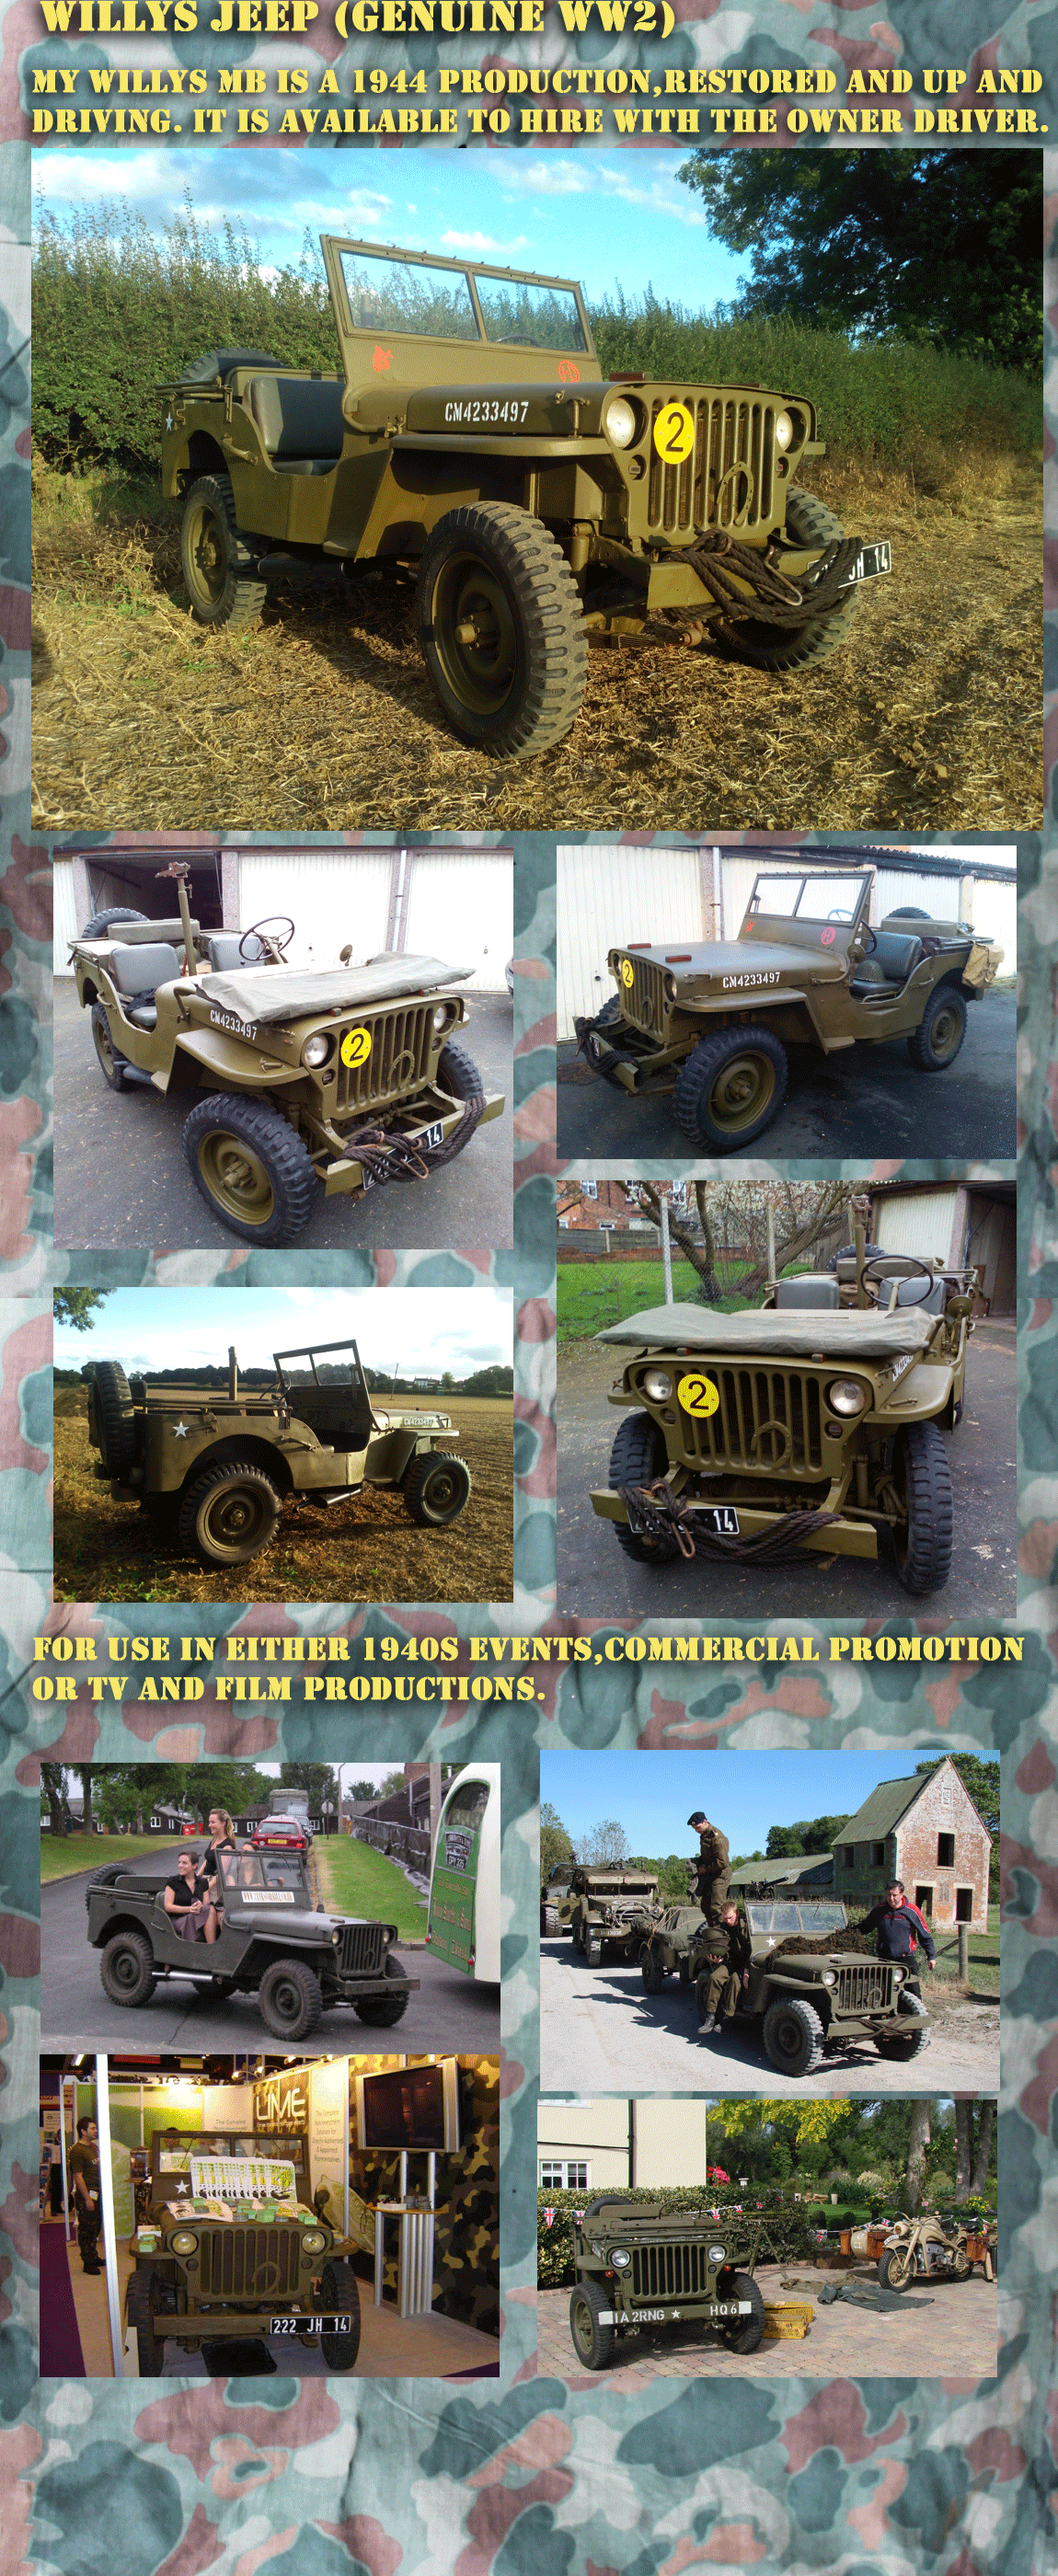 Willys Jeep WW2 USA for hire 